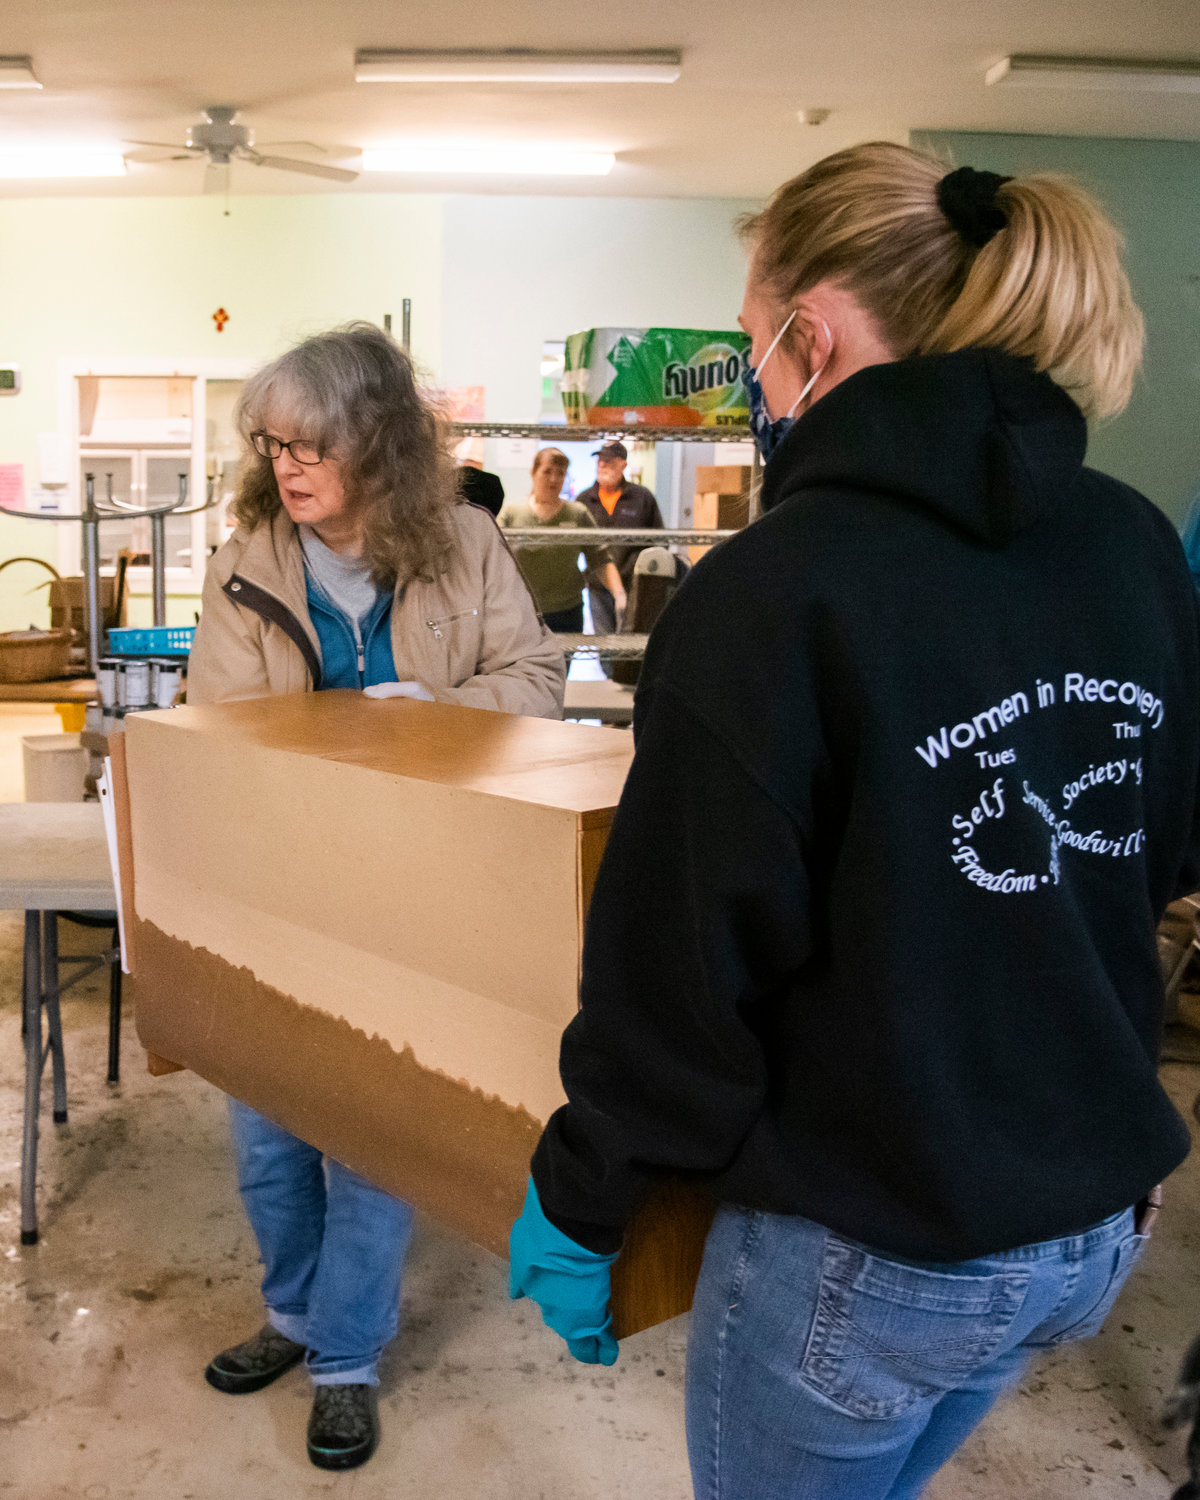 Water damage is seen on donated furniture as it is carried through Lewis County Gospel Mission Monday in Chehalis.